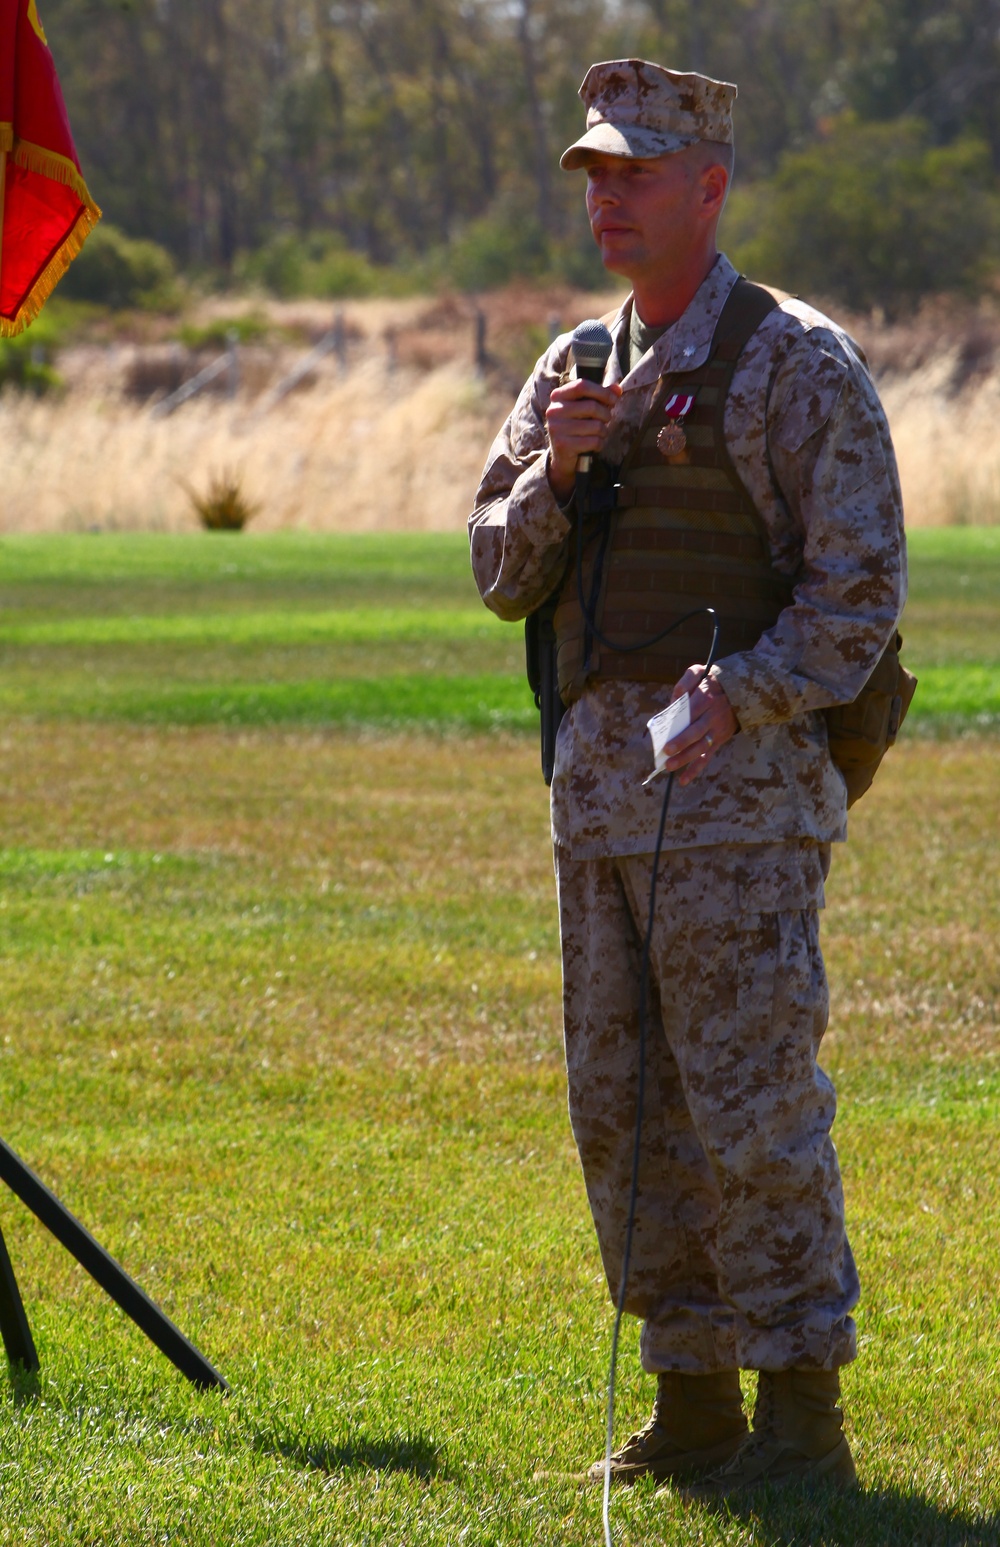 Changing hands: MWHS-3 gets new commanding officer